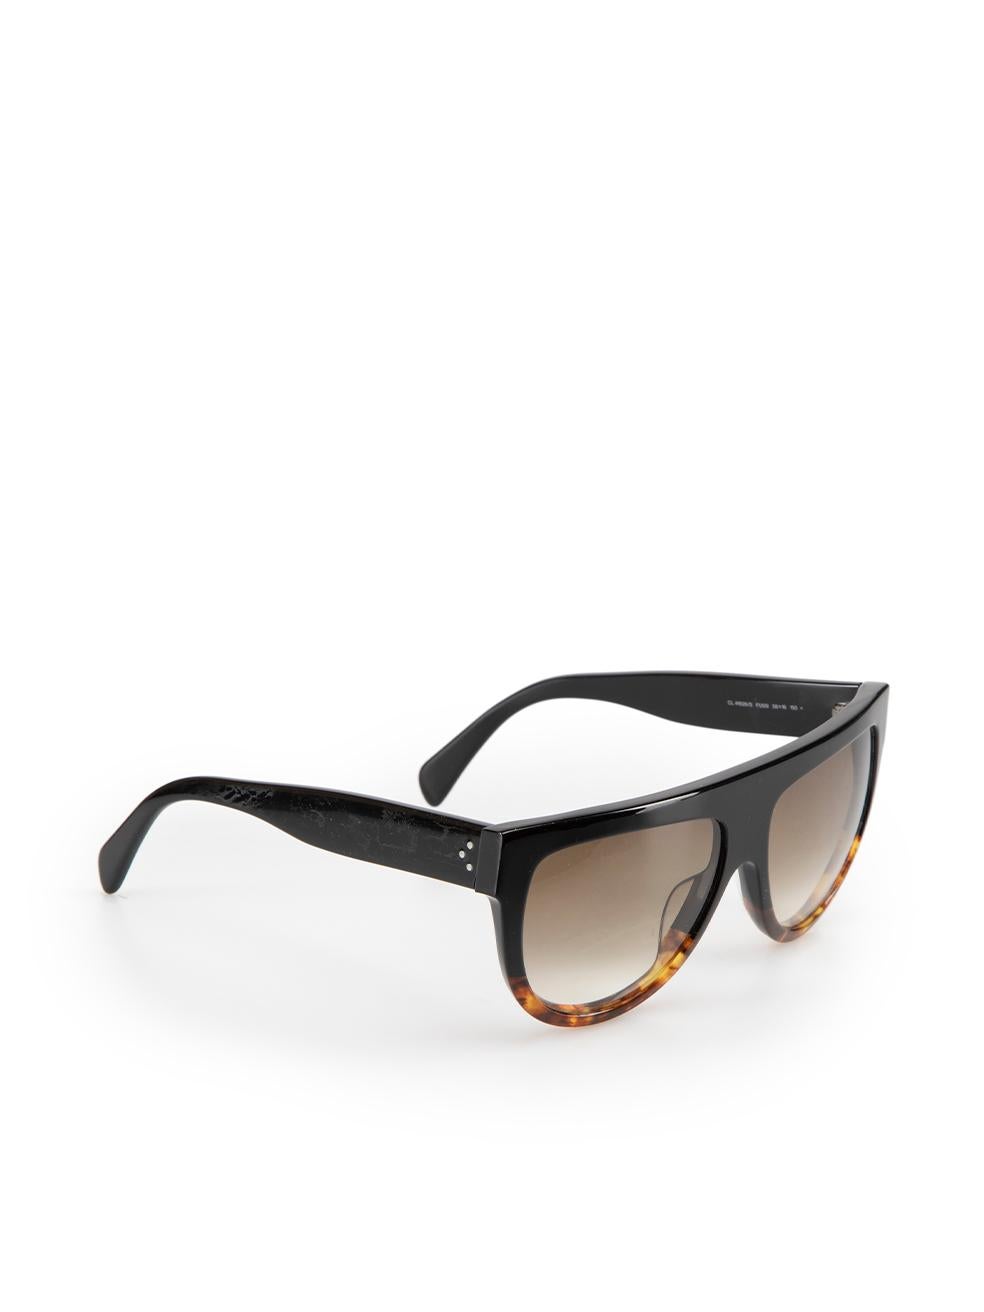 CONDITION is Very good. Hardly any visible wear to sunglasses is evident on this used Celine designer resale item. These sunglasses come with original case.



Details


Black and brown

Acetate

Tortoiseshell pattern

Brown fade lenses



 

Made